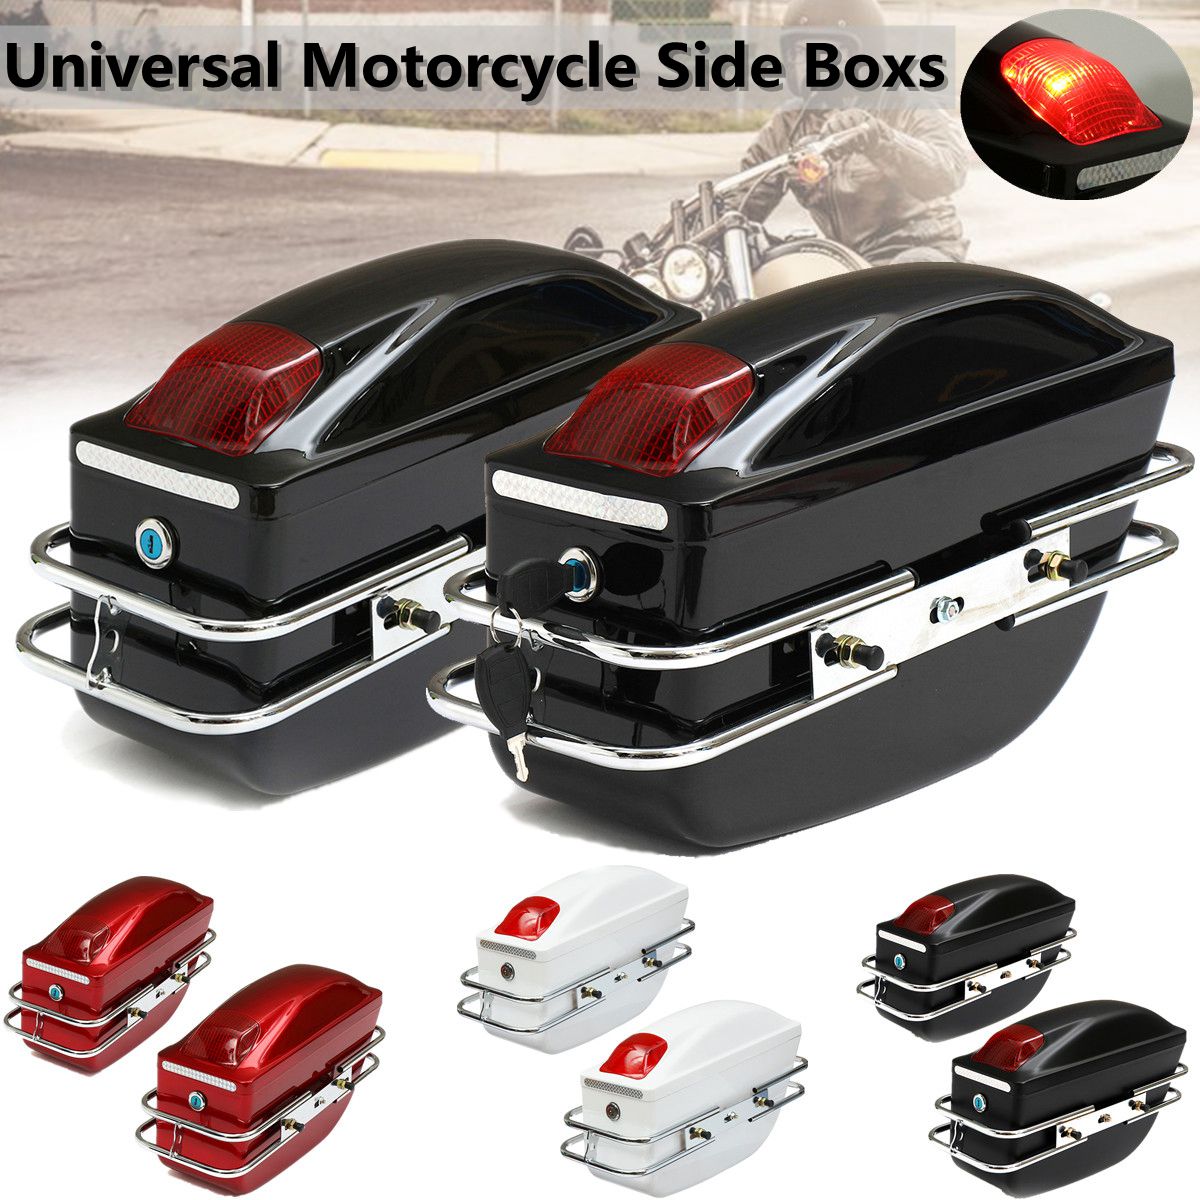 1-Pair-Universal-Motorcycle-Side-Boxs-Luggage-Tank-Tail-Tool-Bag-Hard-Case-Saddle-Bags-For